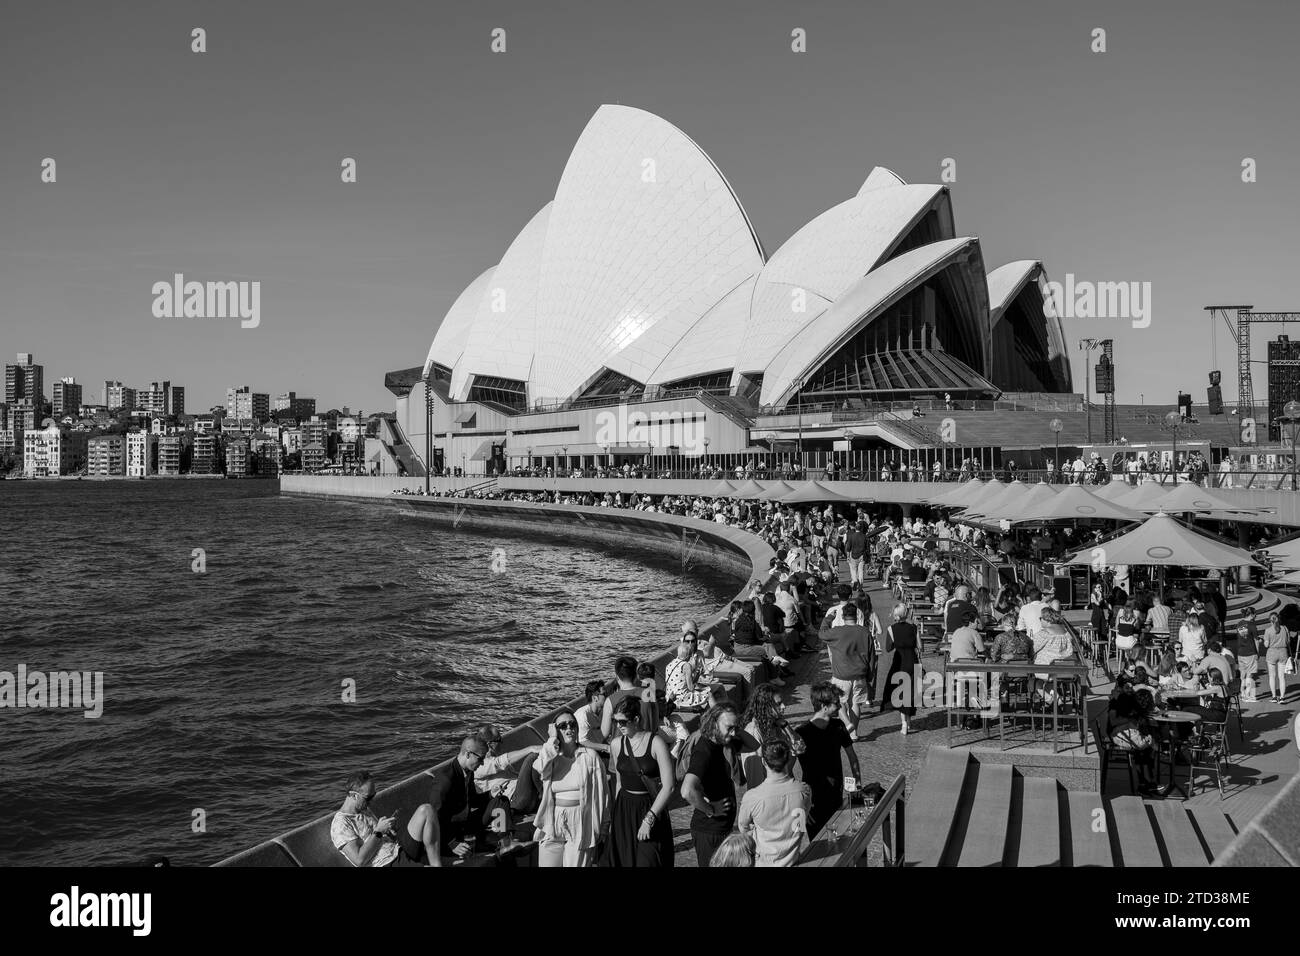 Sydney, Australia: 12-1-2023: Australians Relaxing by the Sydney Opera House in Black and White Stock Photo